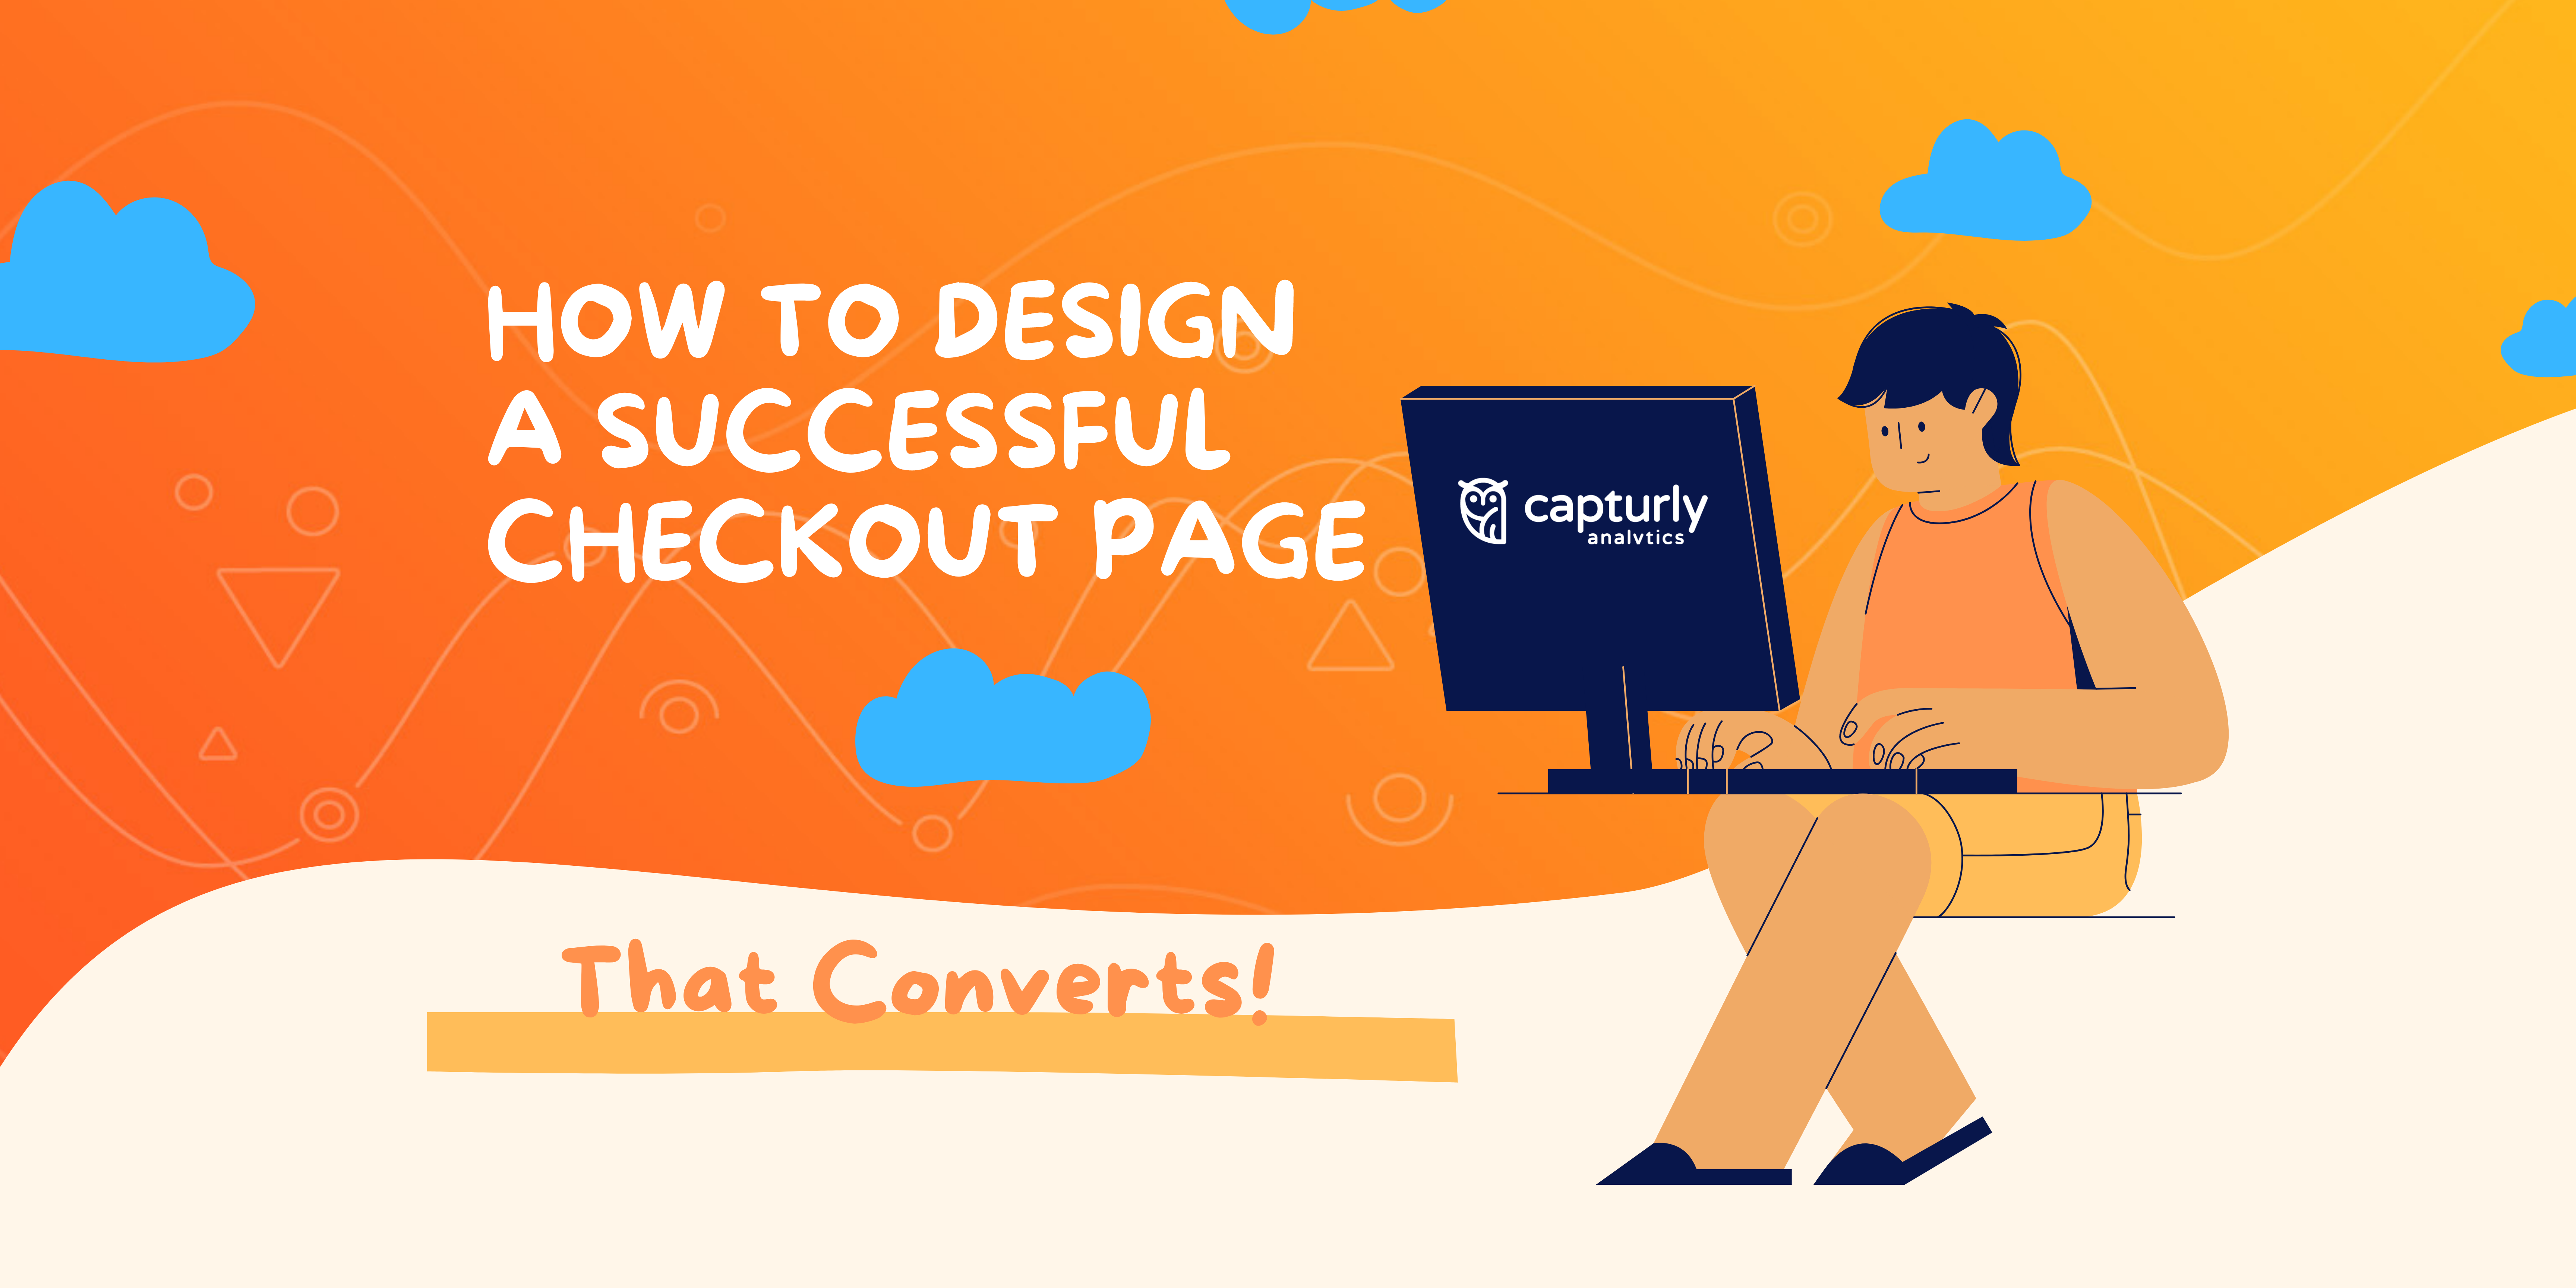 How To Design a Successful Checkout Page (1)